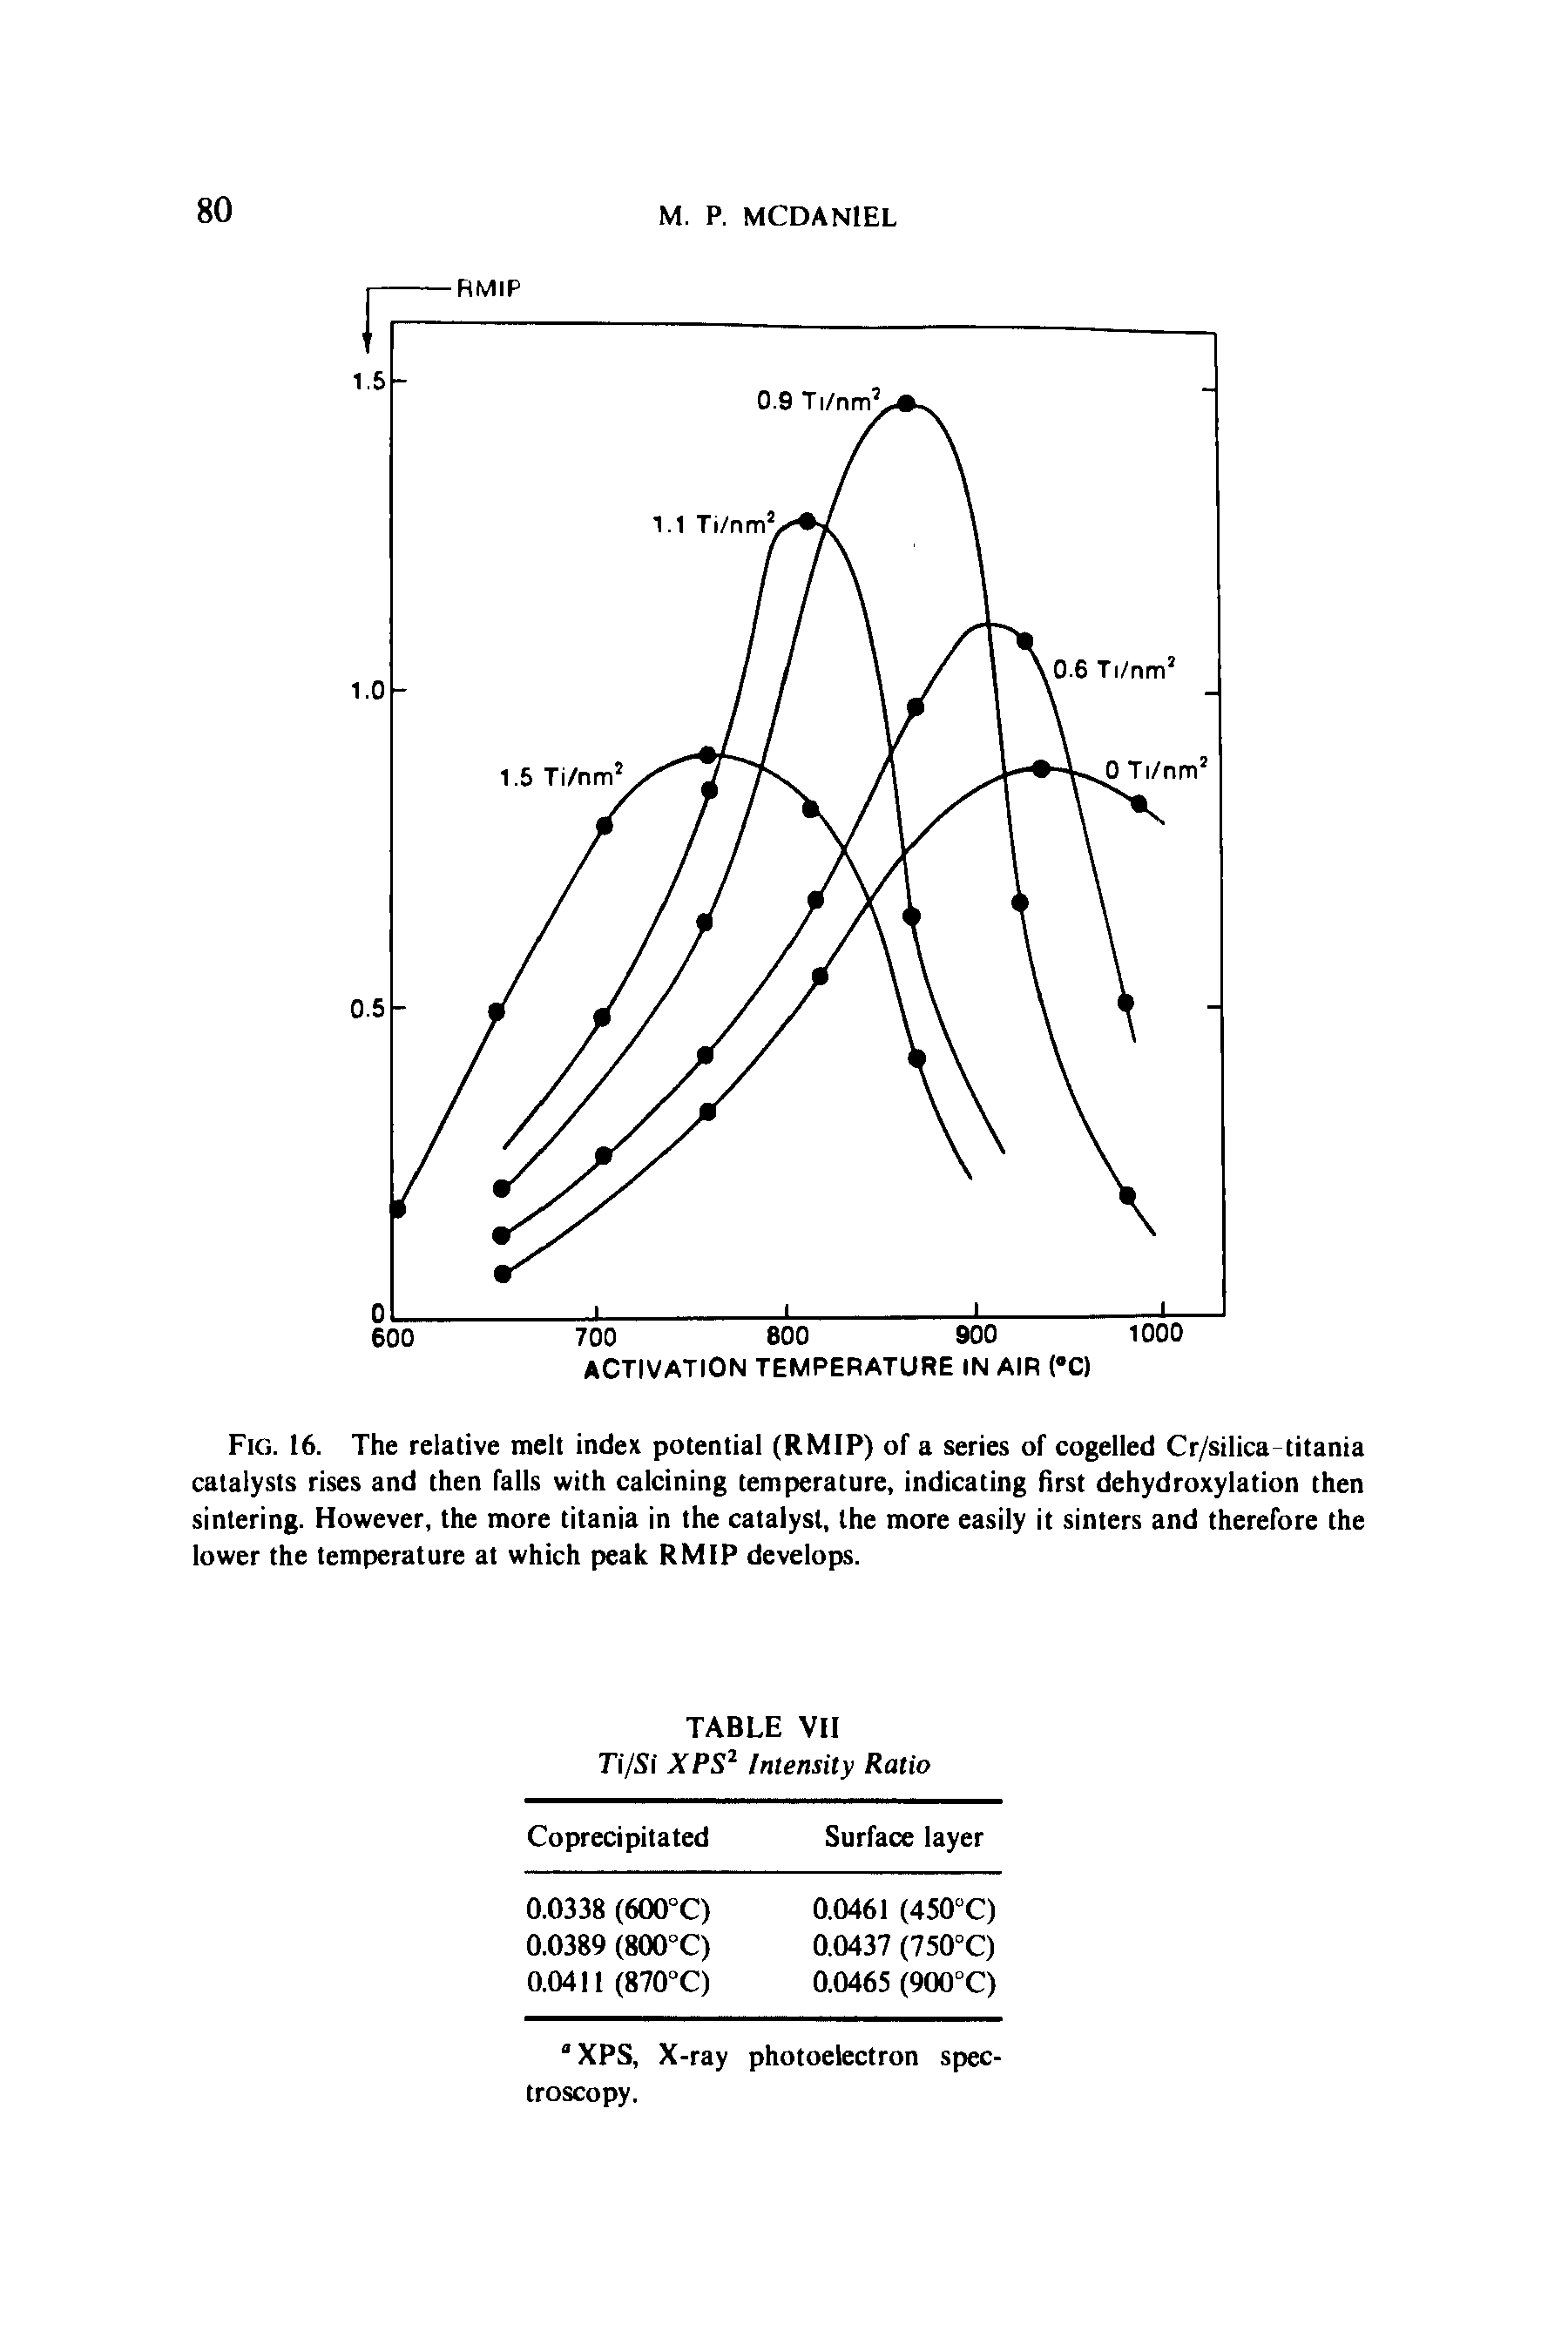 Fig. 16. The relative melt index potential (RMIP) of a series of cogelled Cr/silica titania catalysts rises and then falls with calcining temperature, indicating first dehydroxylation then sintering. However, the more titania in the catalyst, the more easily it sinters and therefore the lower the temperature at which peak RMIP develops.